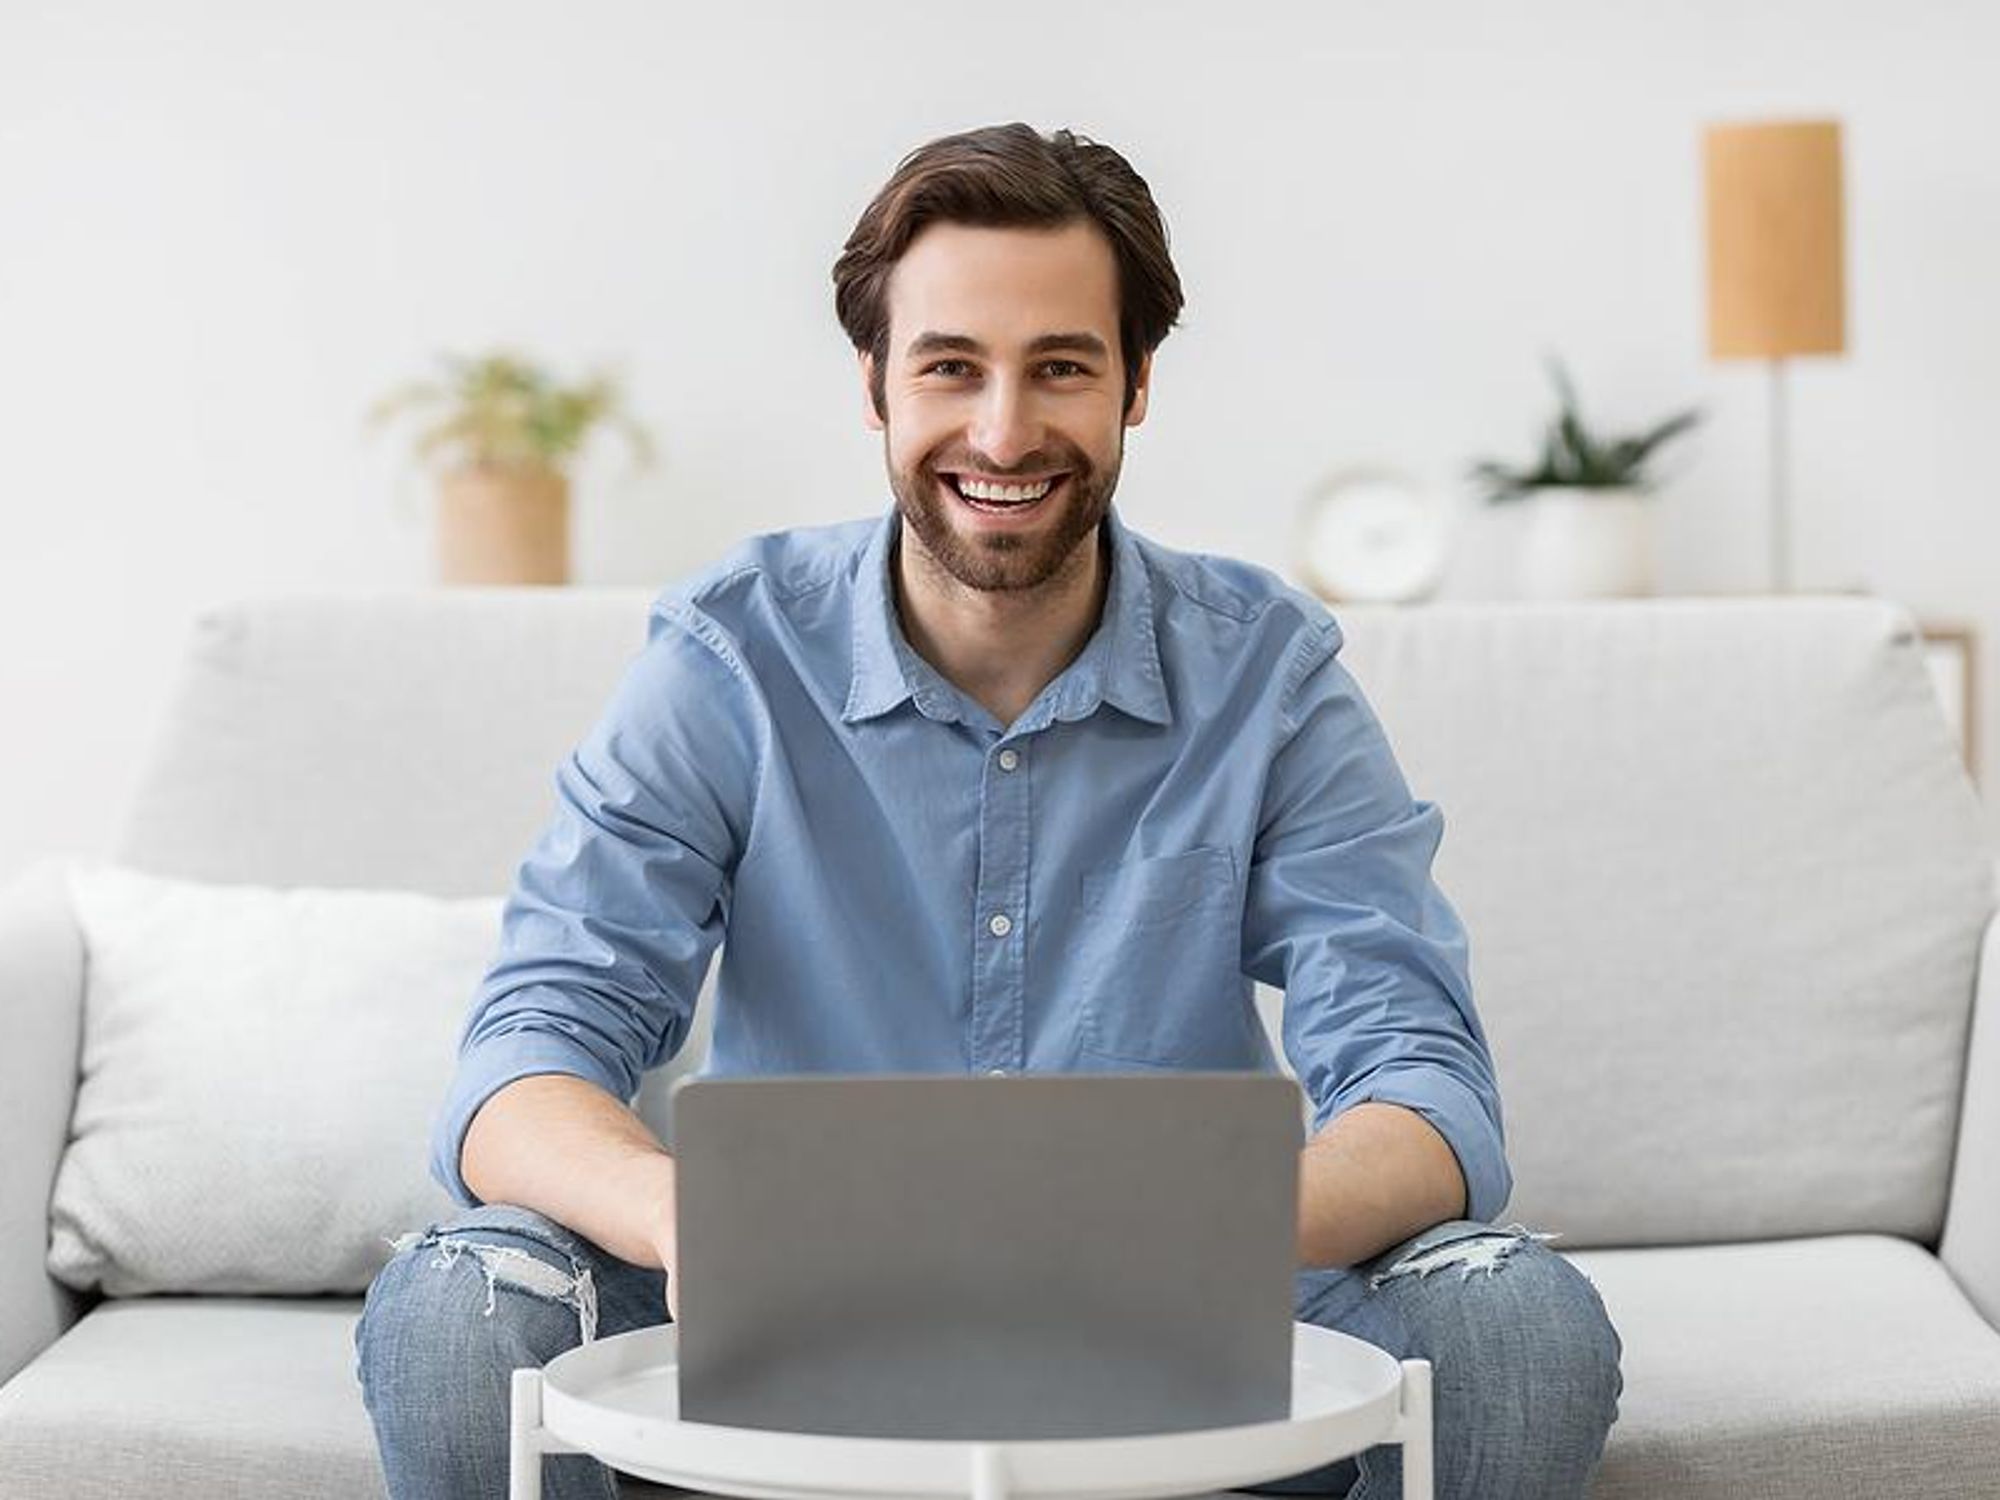 Man on laptop with a flexible work schedule works from home